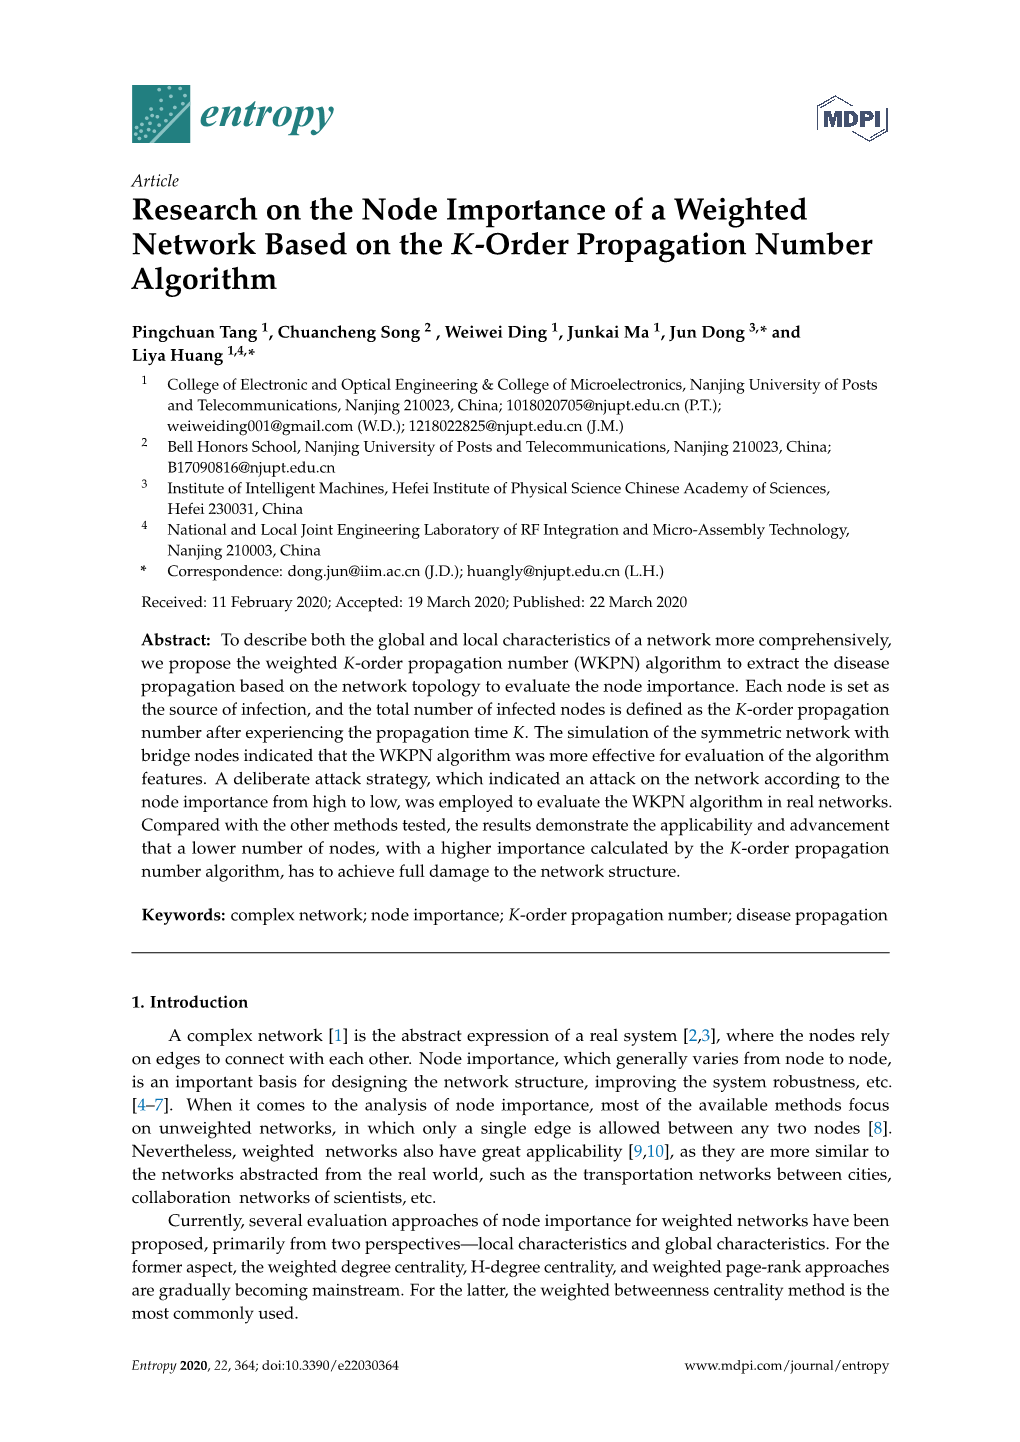 Research on the Node Importance of a Weighted Network Based on the K-Order Propagation Number Algorithm